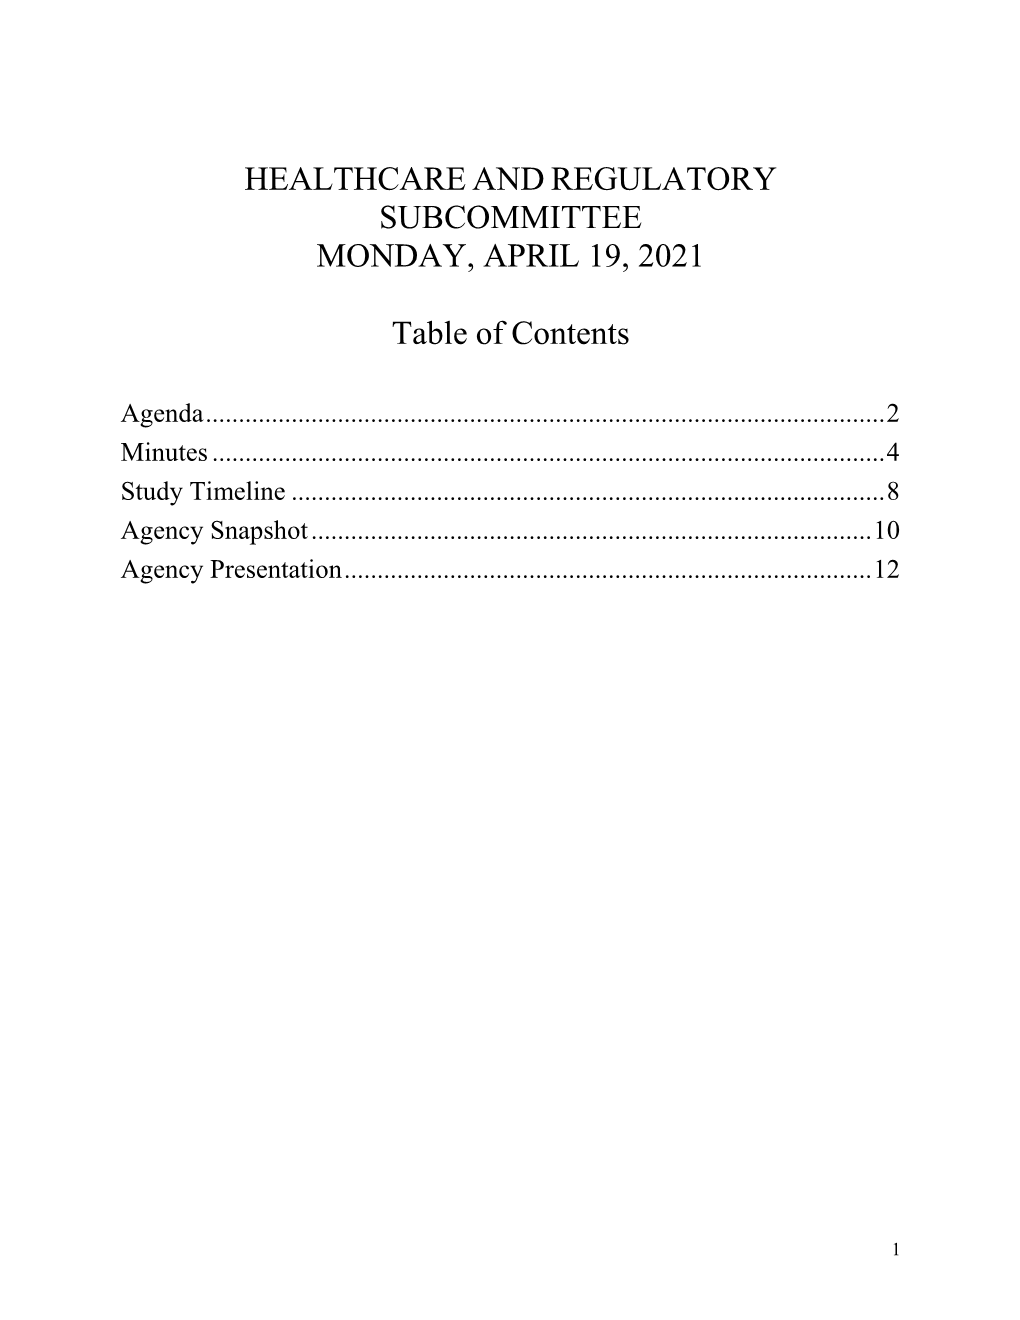 Healthcare and Regulatory Subcommittee Monday, April 19, 2021